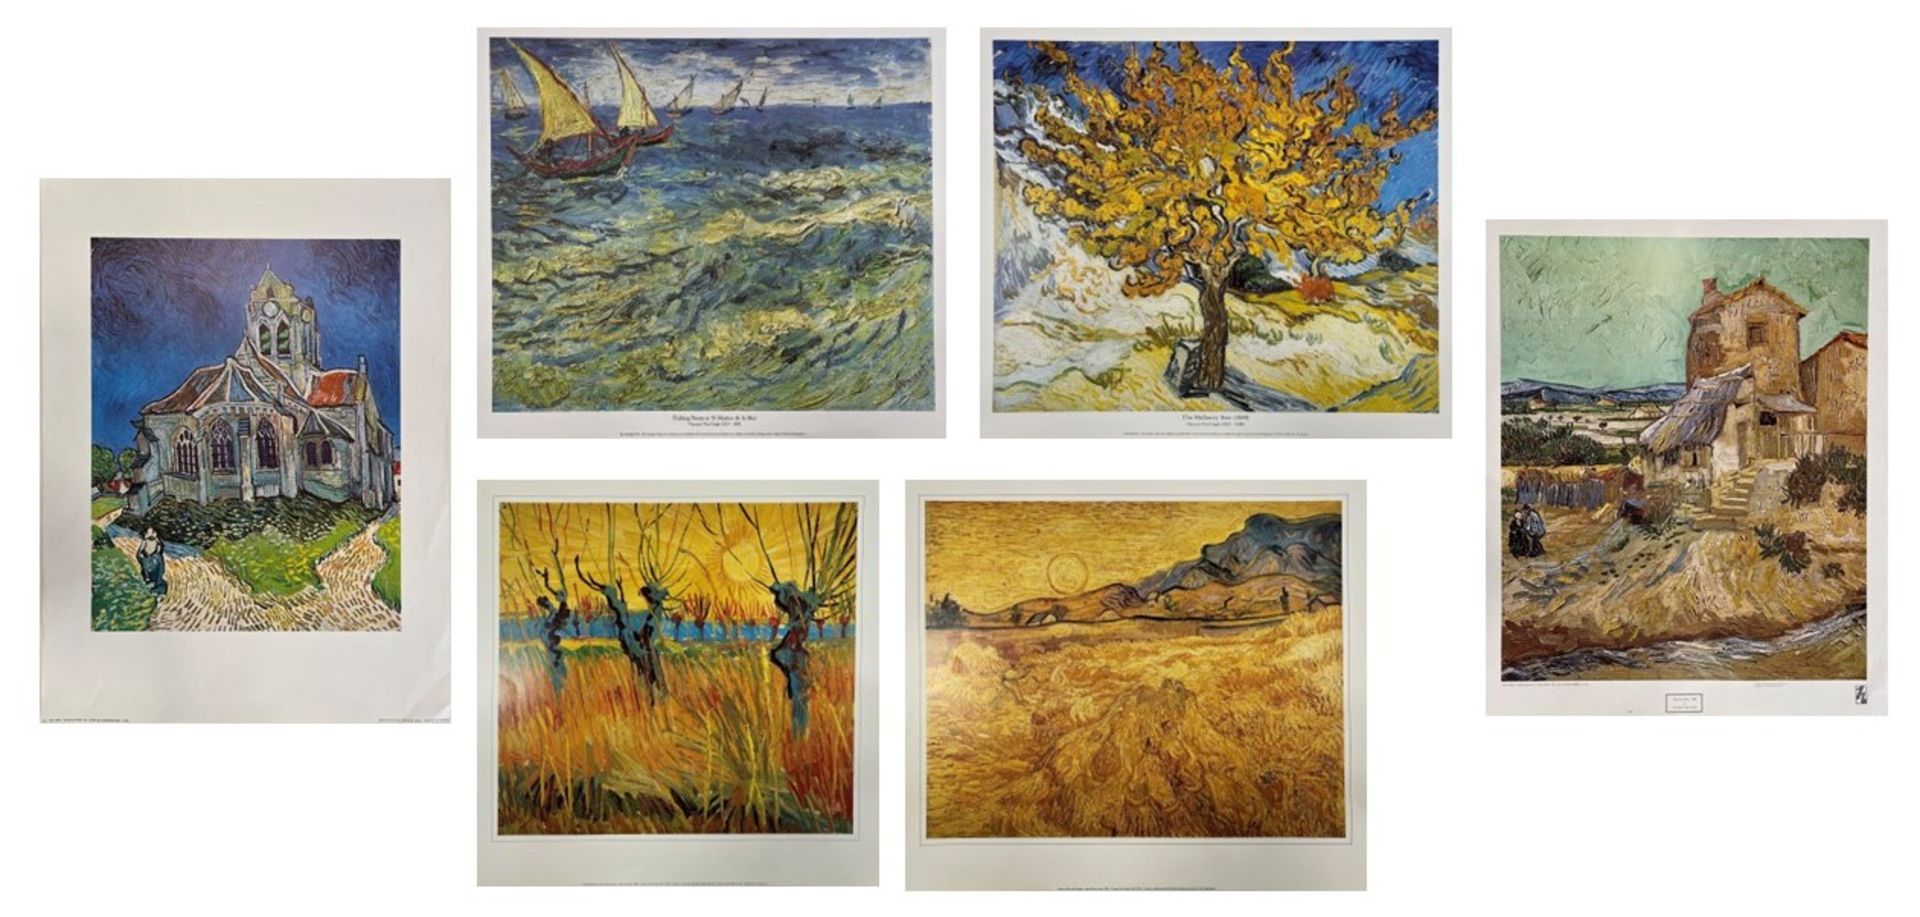 SIX VINTAGE 20TH CENTURY GALLERY POSTERS AFTER VINCENT VAN GOGH